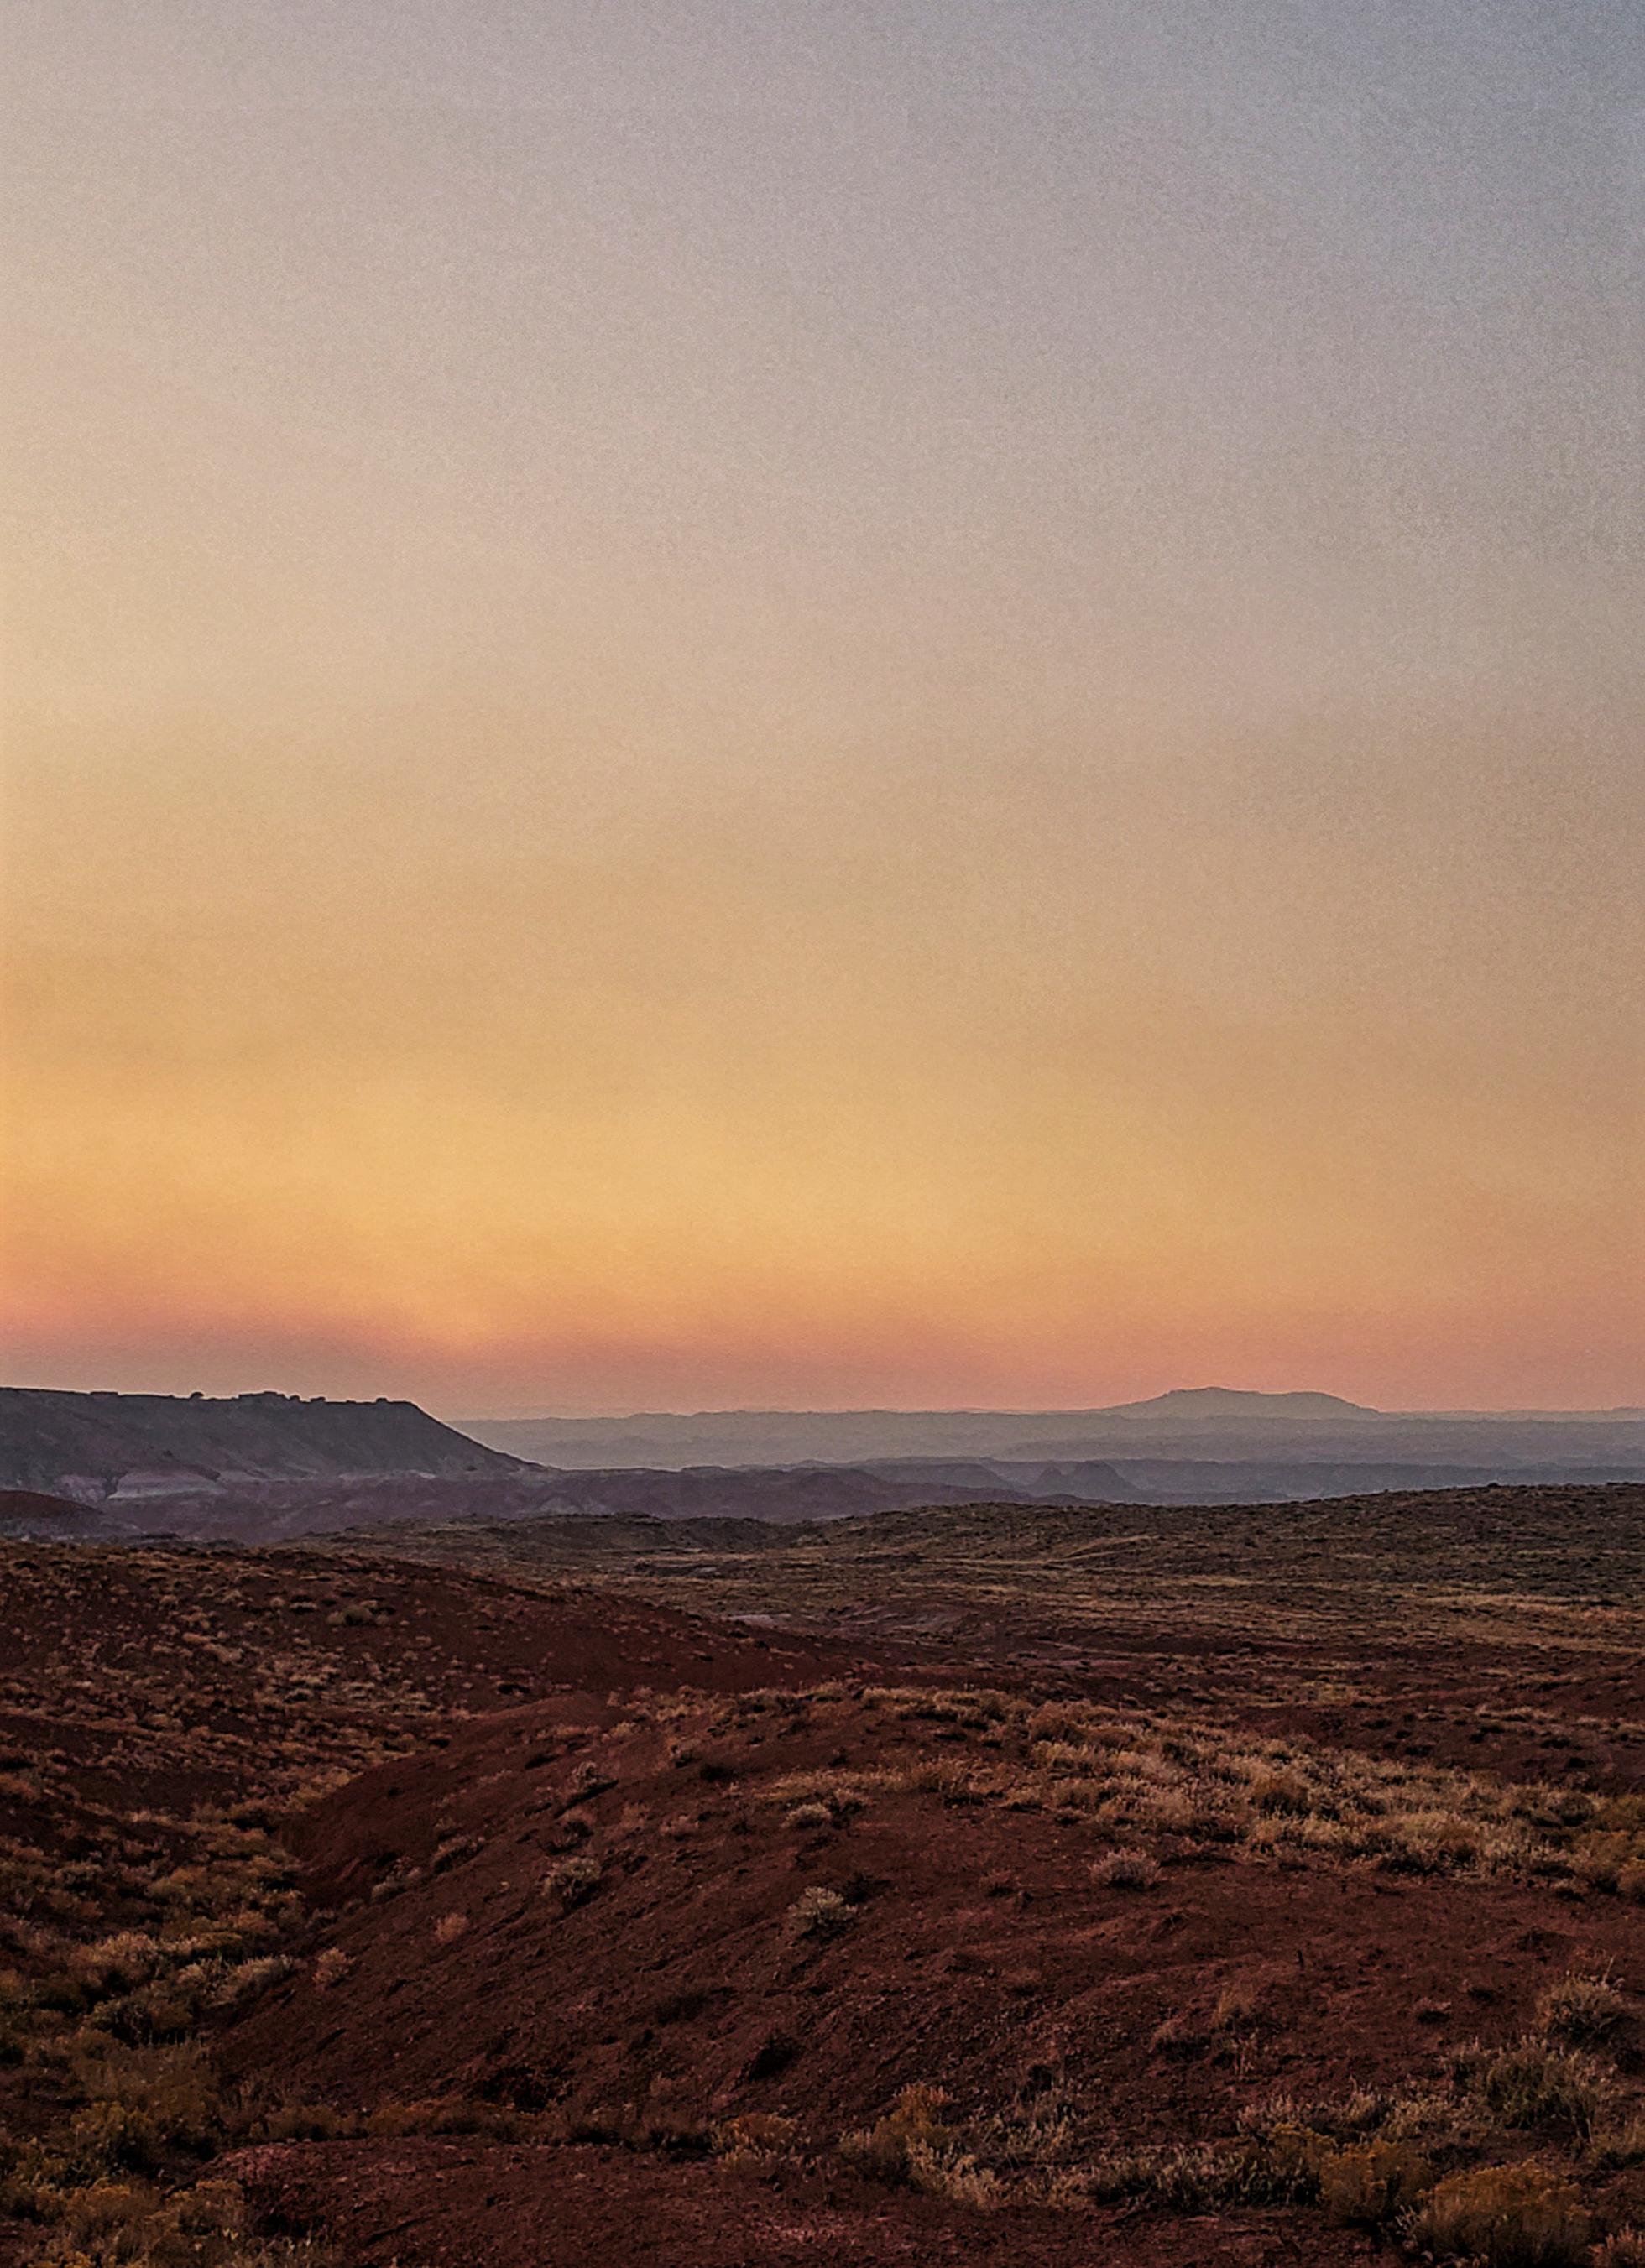 The Painted Desert was covered in smoke yesterday making it look like an alien planet